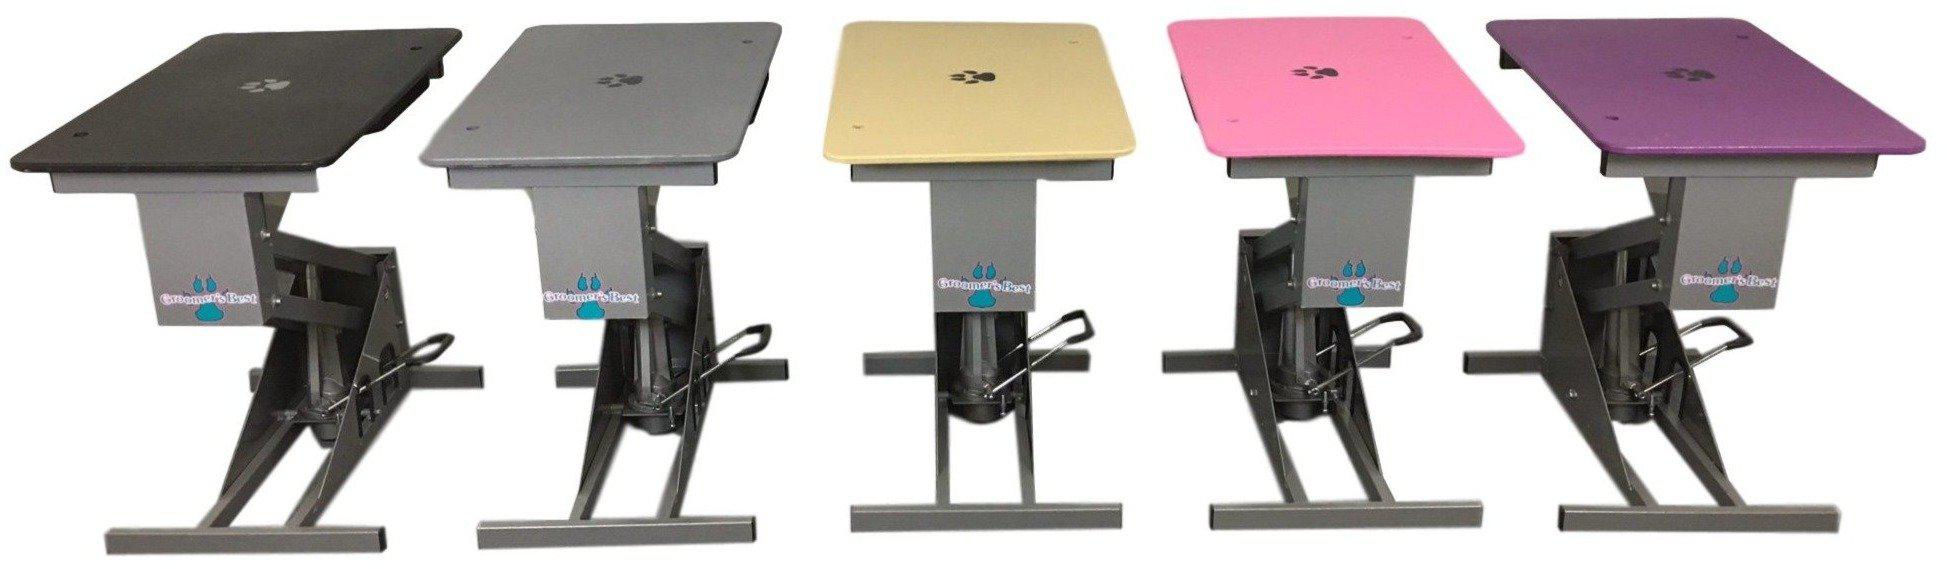 Groomer's Best Electric Low Profile Grooming Table